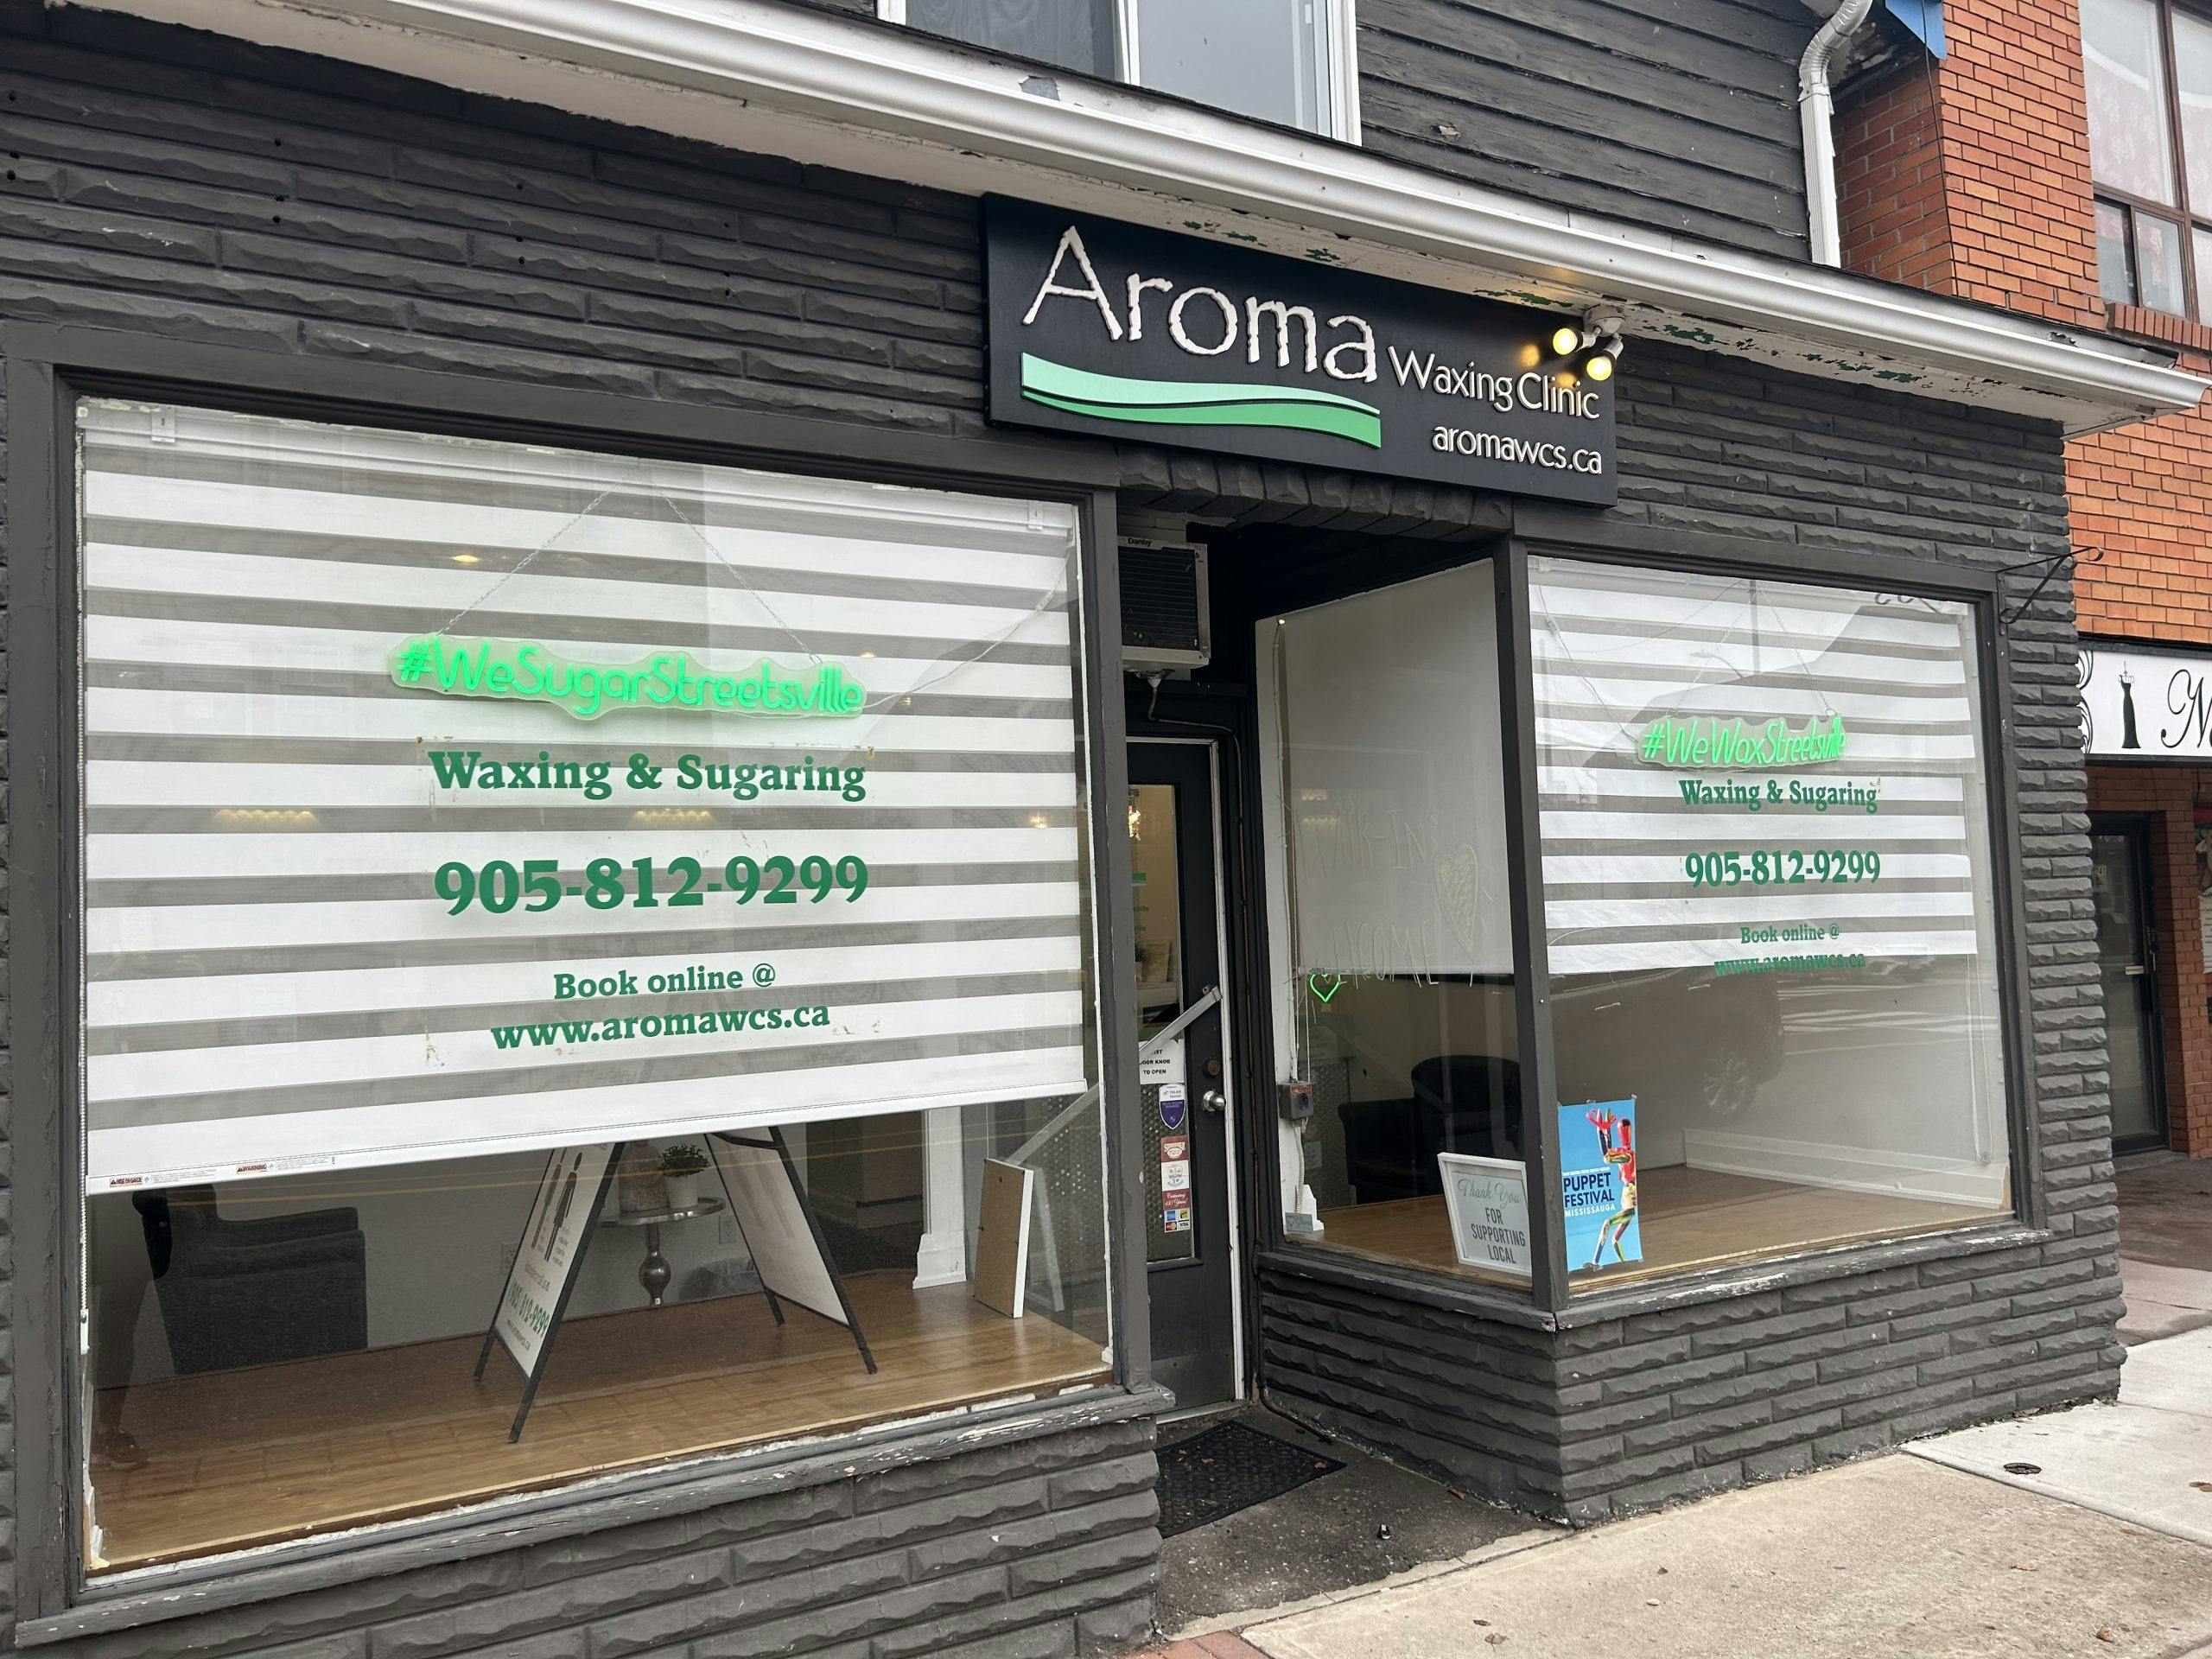 The storefront of Aroma Waxing and Laser Clinic (Streetsville location) with hours of operation, address, phone number, and email below